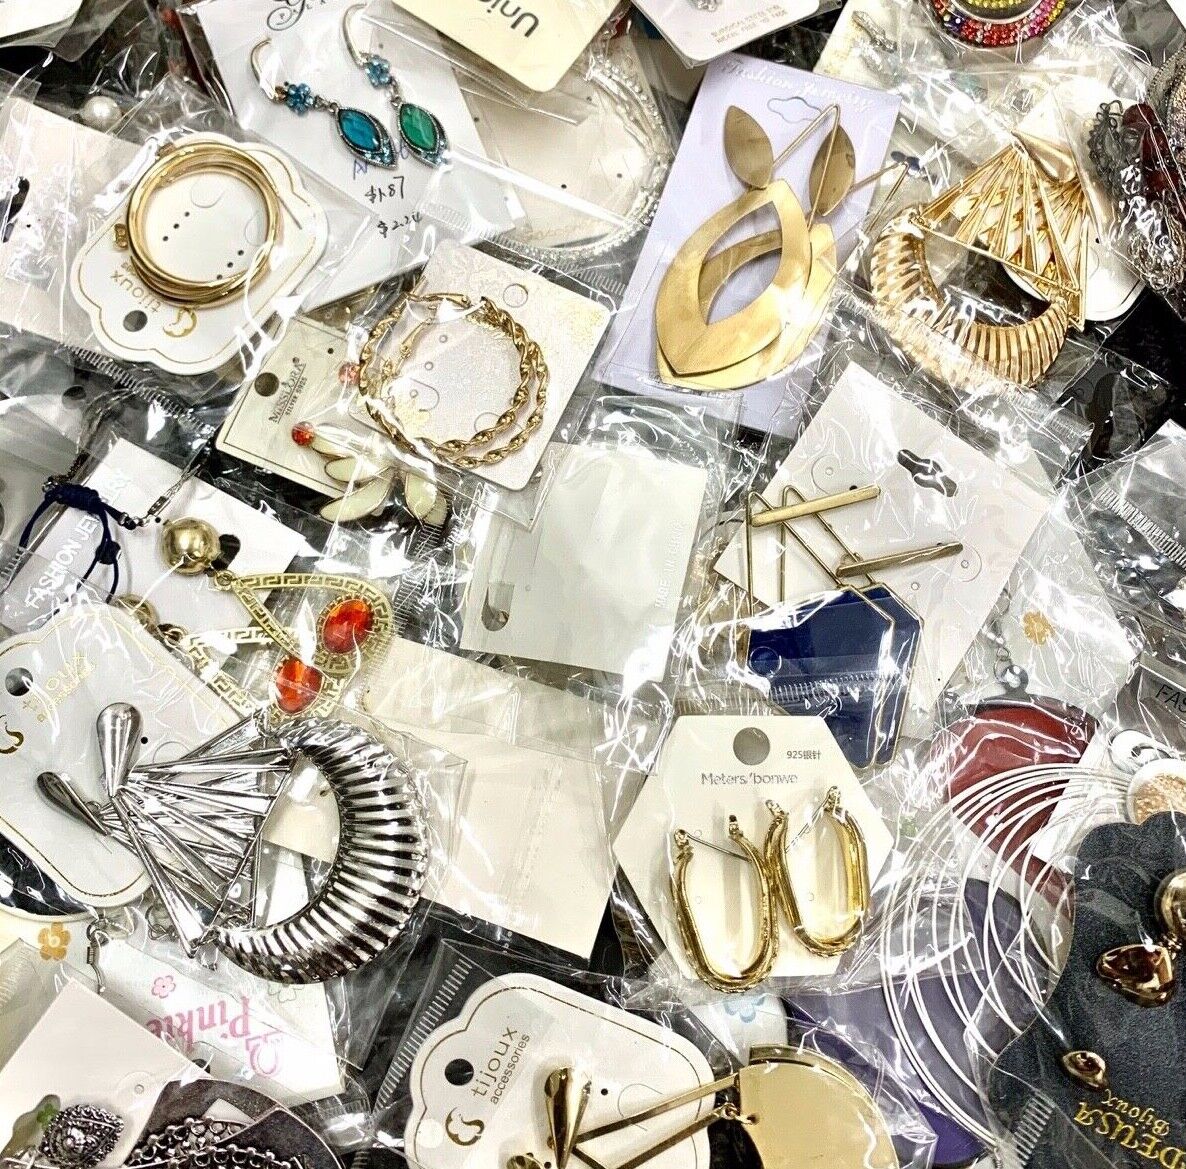 Wholesale Jewelry Lot - 30 Pairs High End Quality Earrings USA Seller Fast Ship Mix